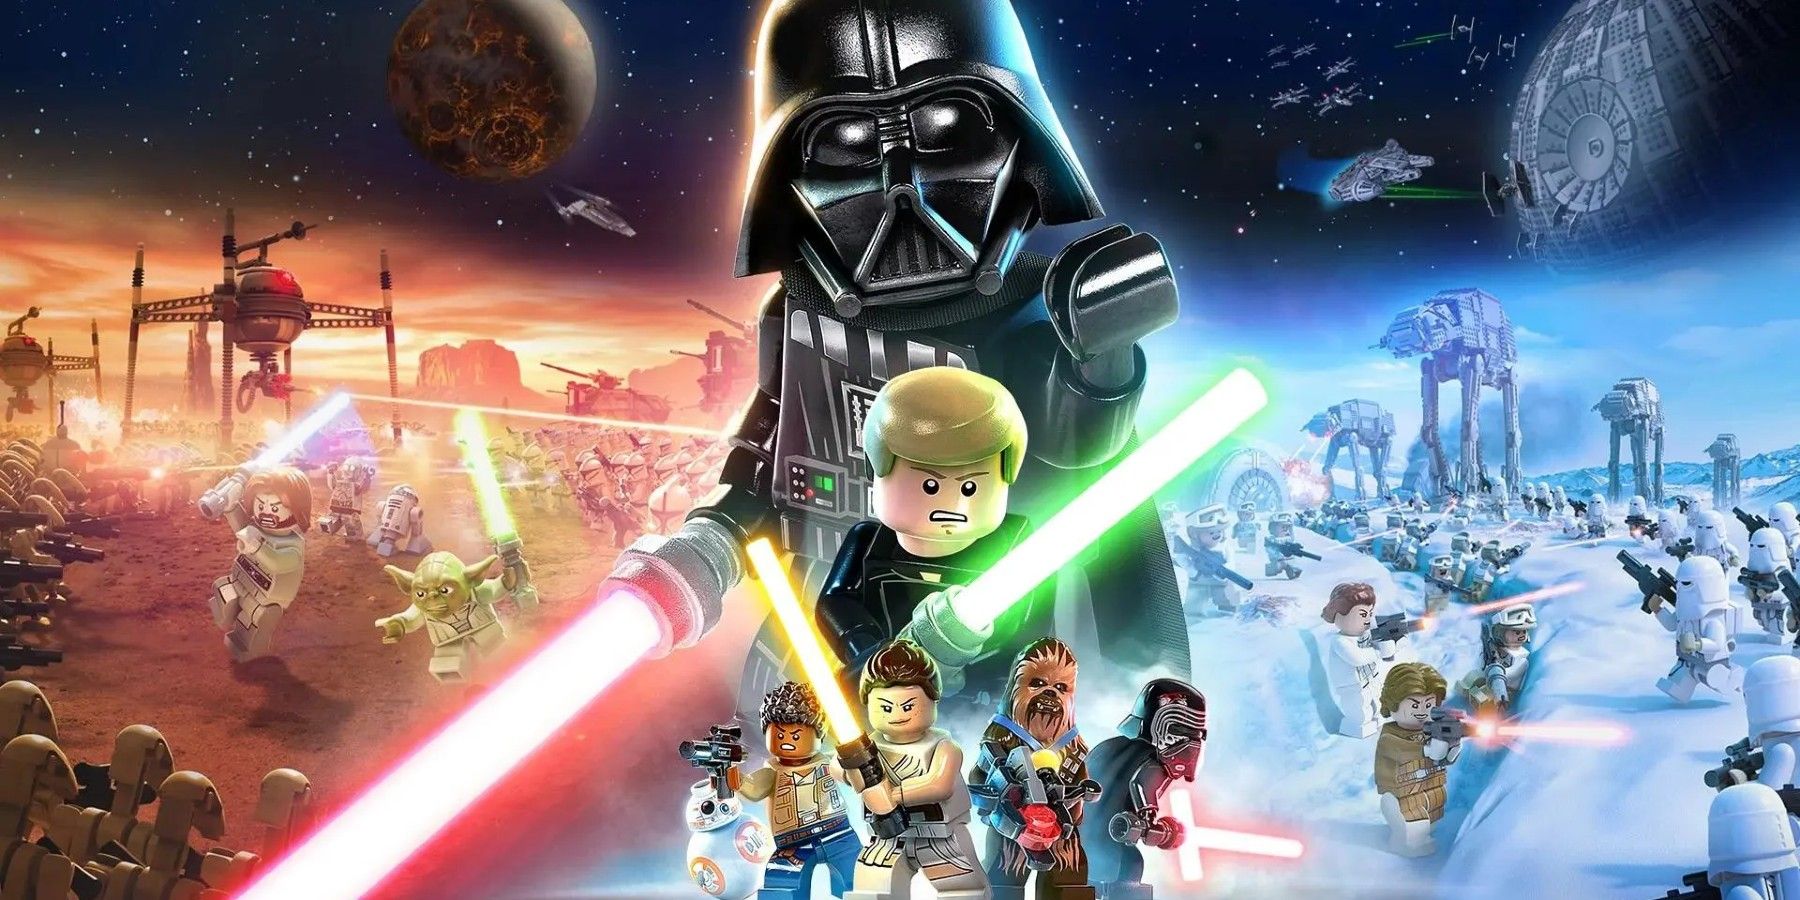 LEGO Star Wars Skywalker Saga cover without text